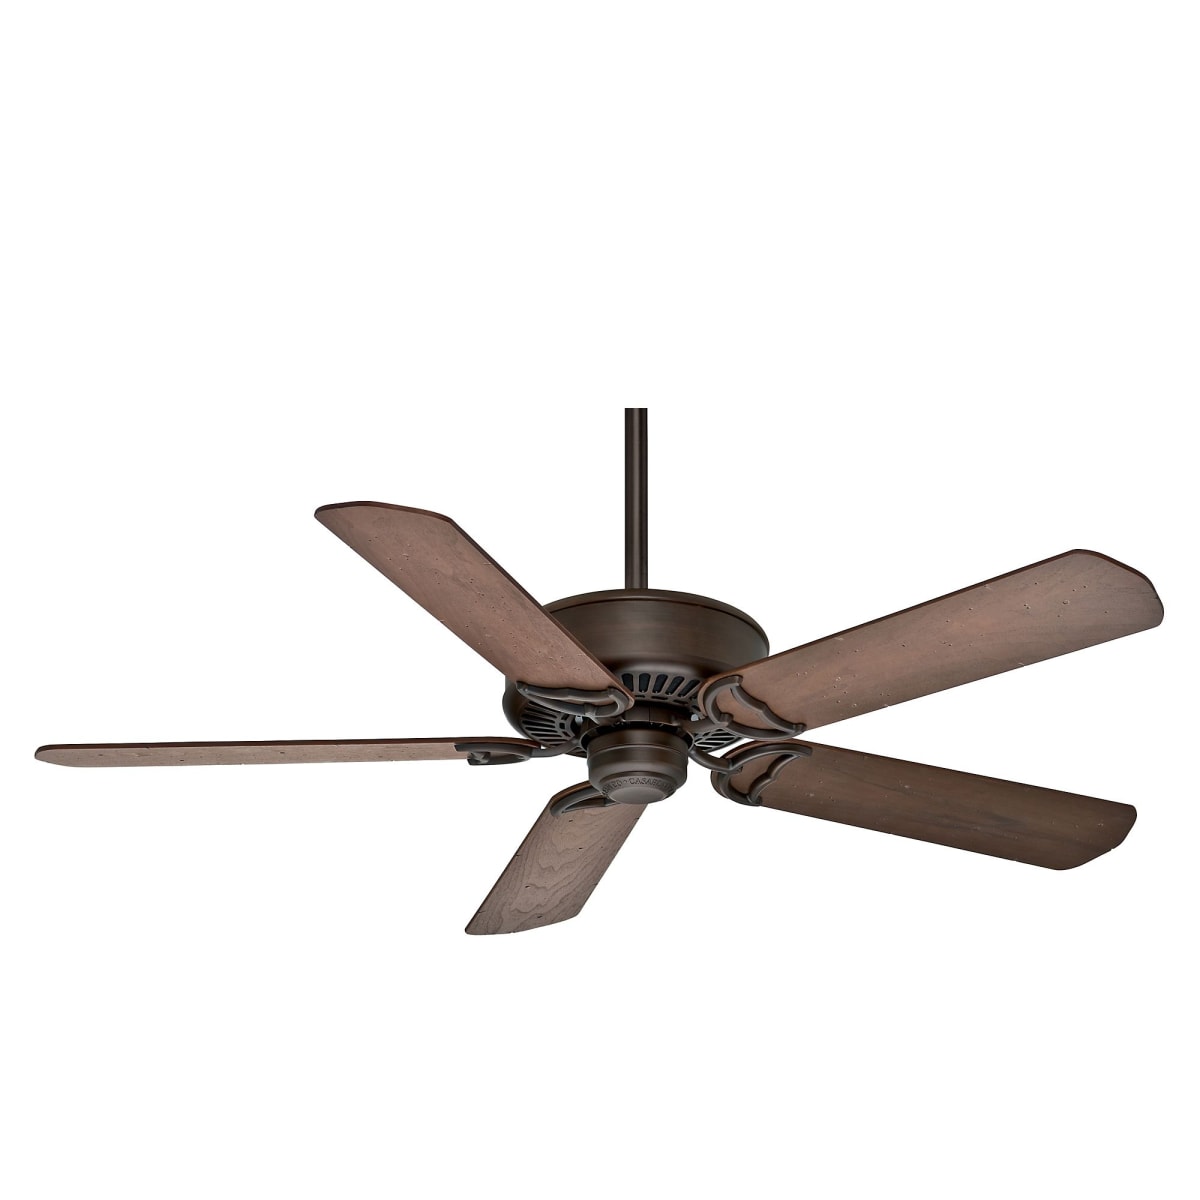 Casablanca 59512 Brushed Cocoa Panama 54 5 Blade Dc Indoor Ceiling Fan Blades And Remote Control Included Lightingdirect Com